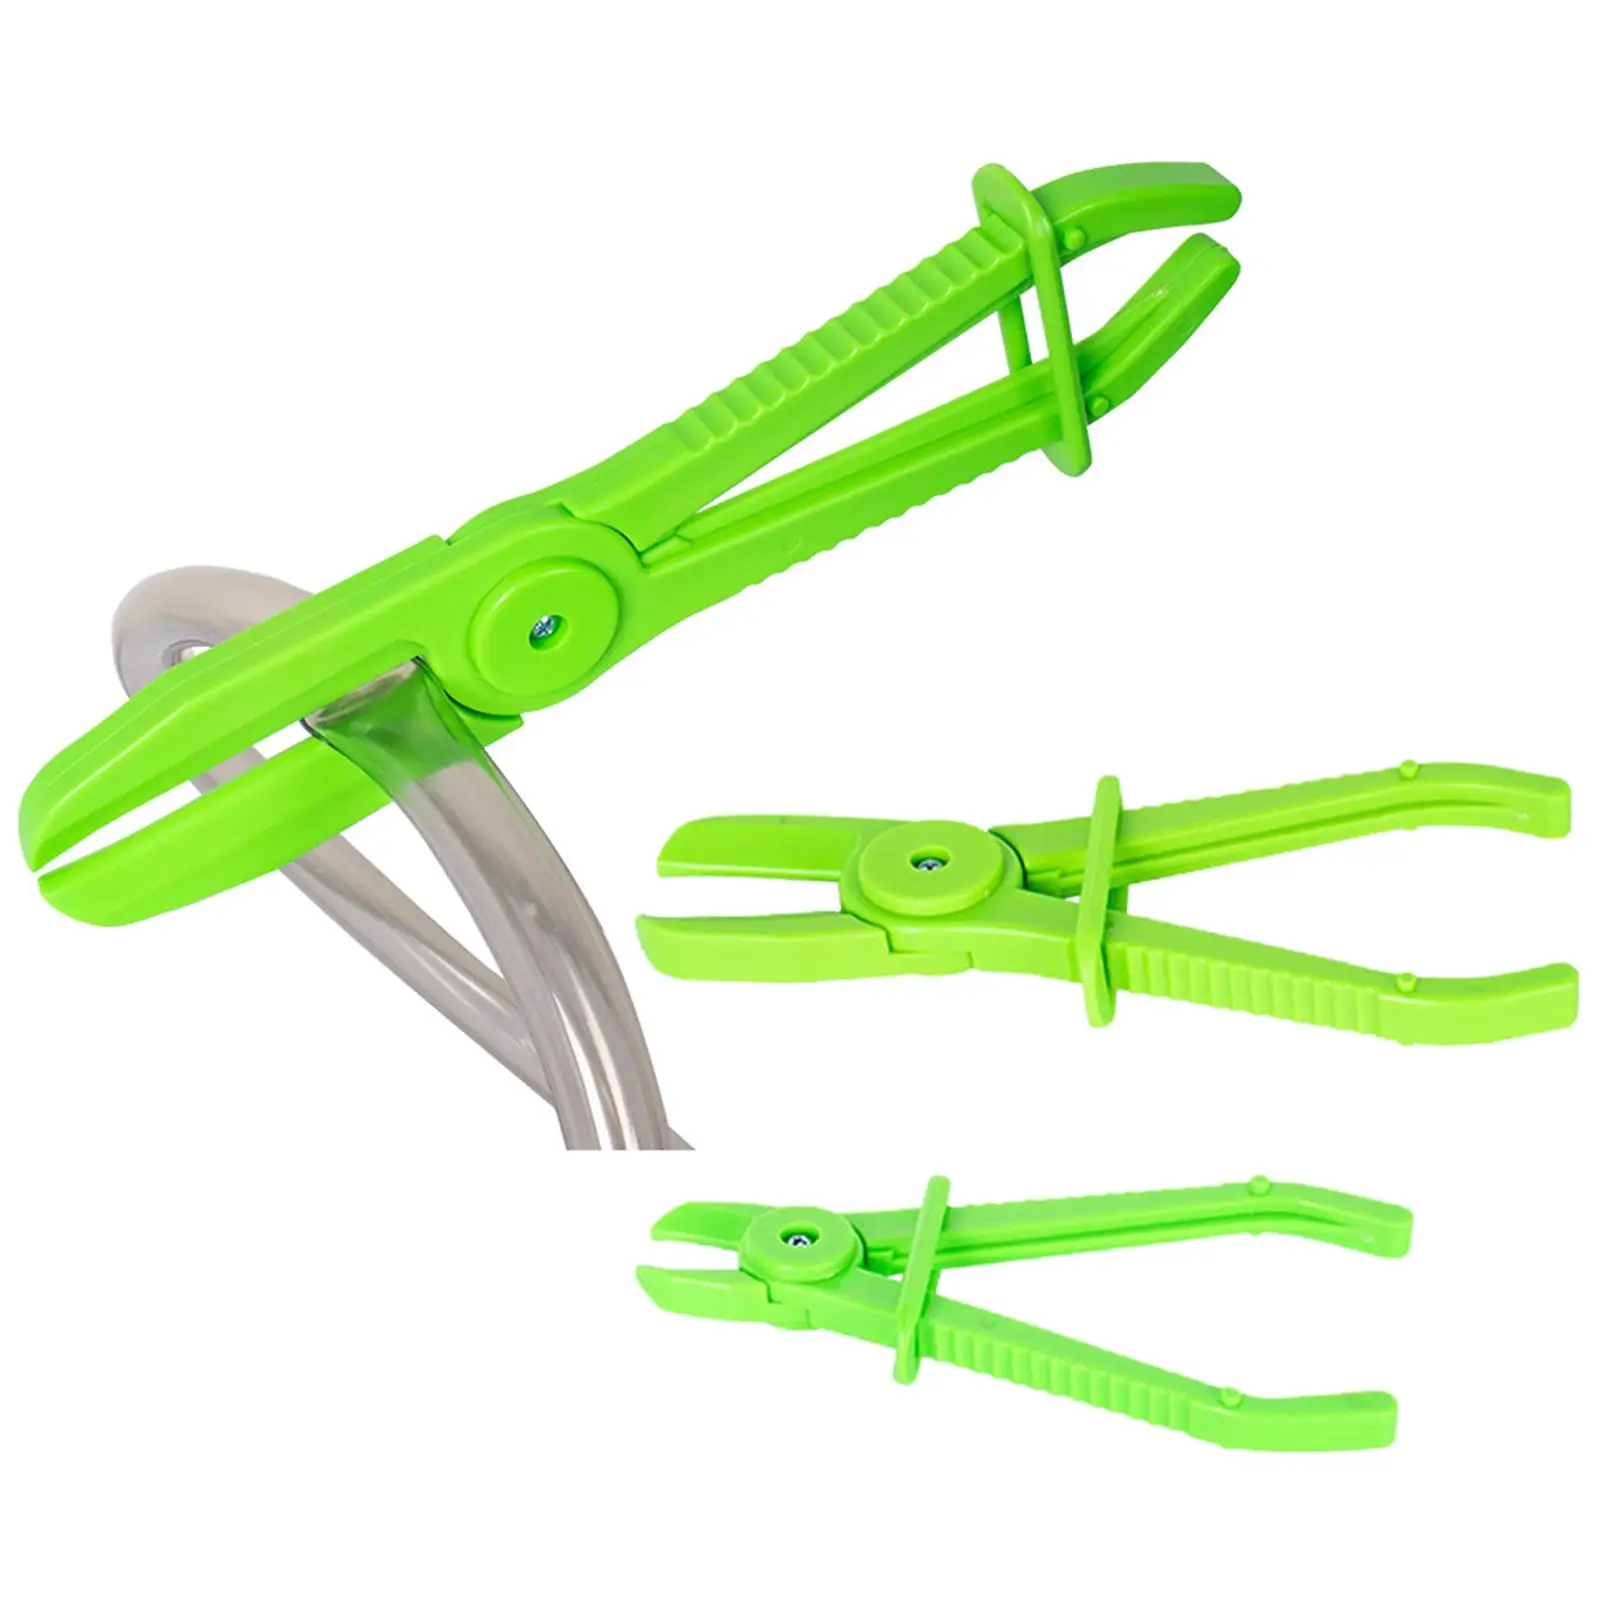 3x Hose Clamp Pinch Pliers 1/2